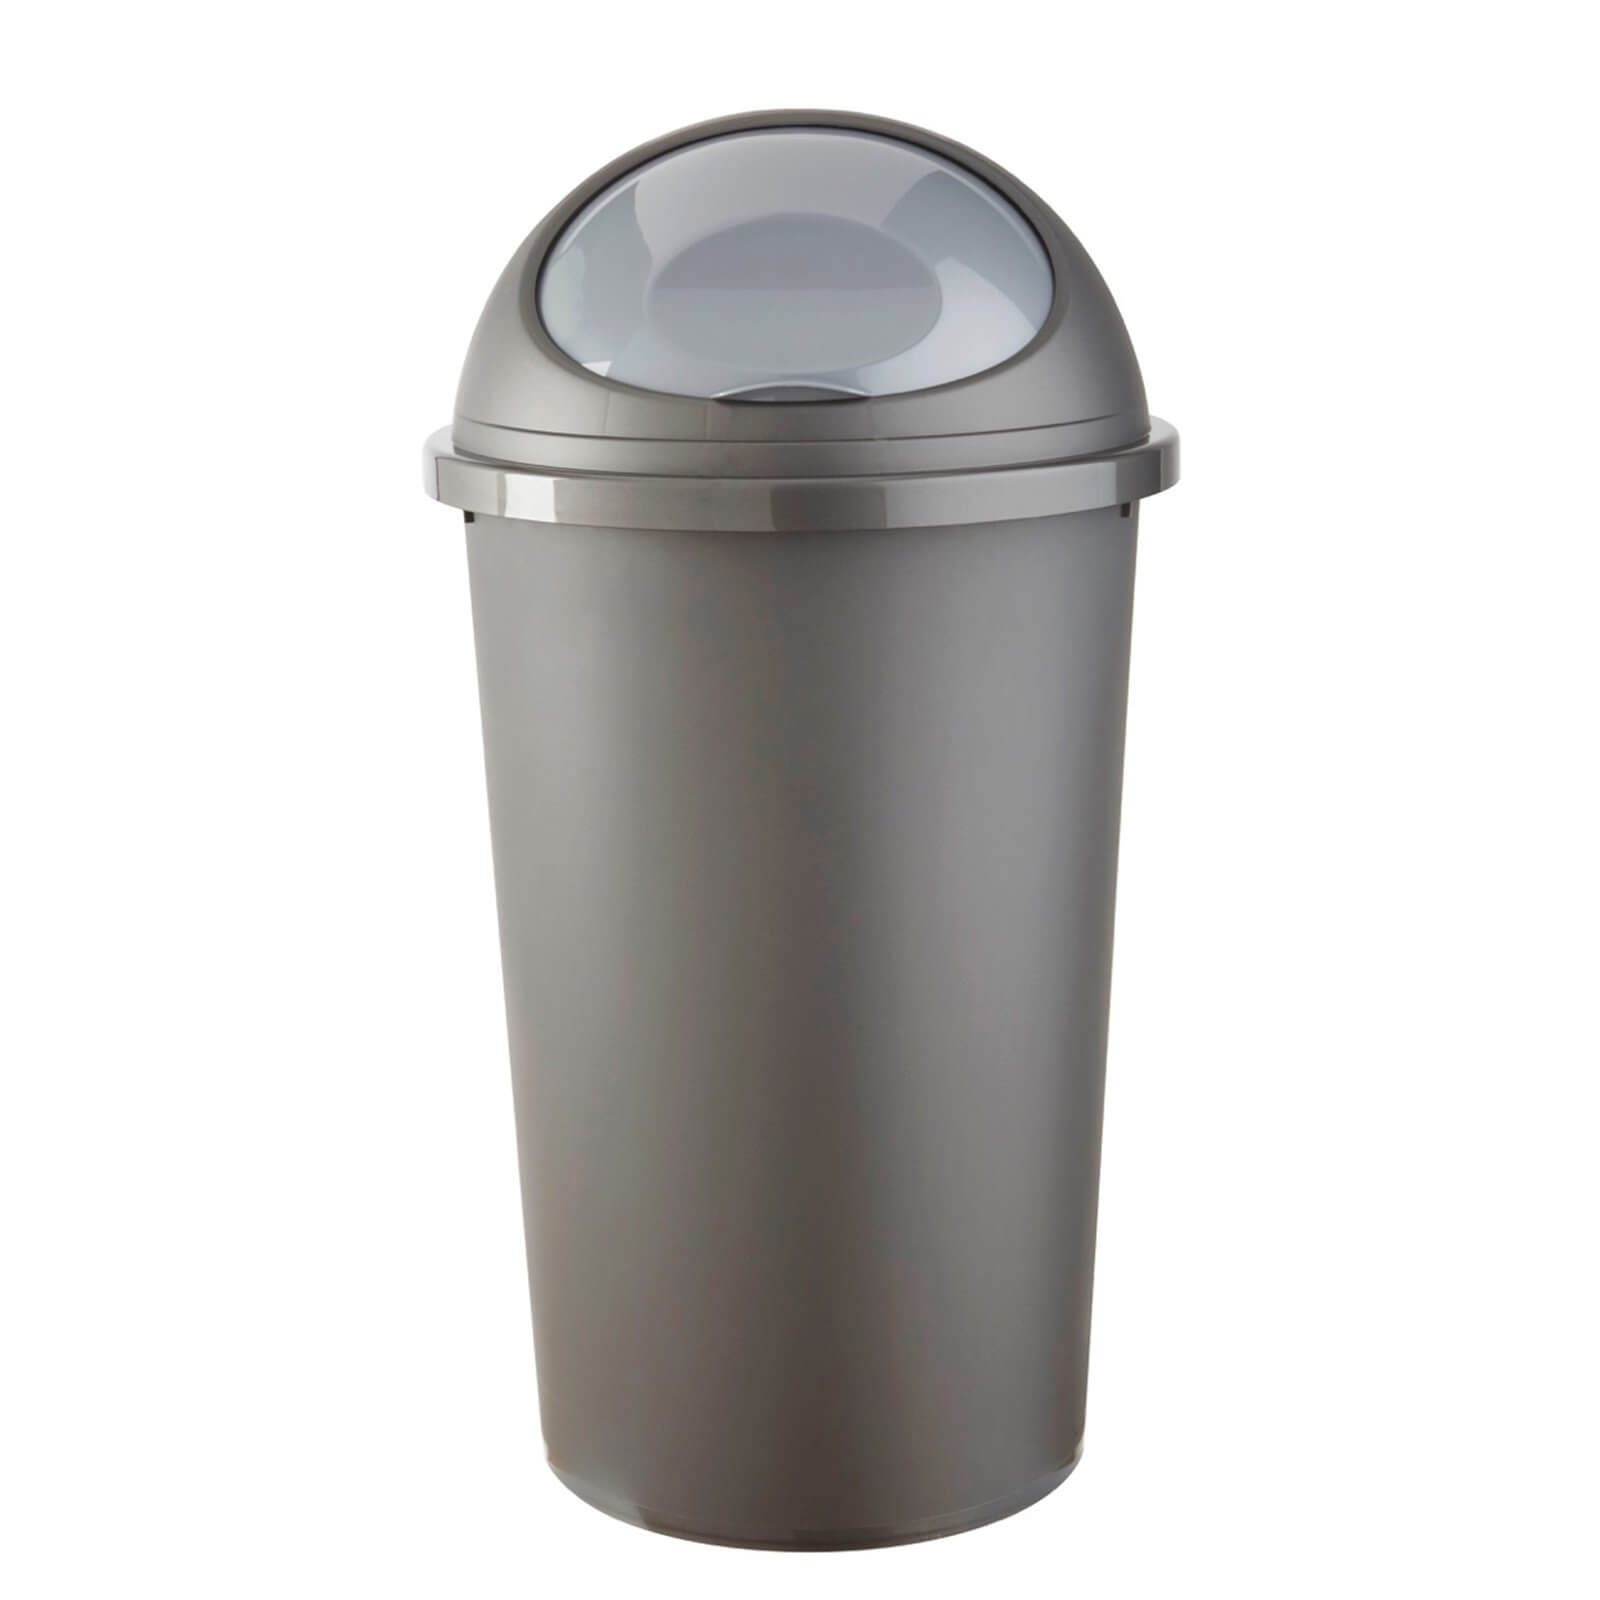 Photo of 50l Bullet Bin Platinum And Silver